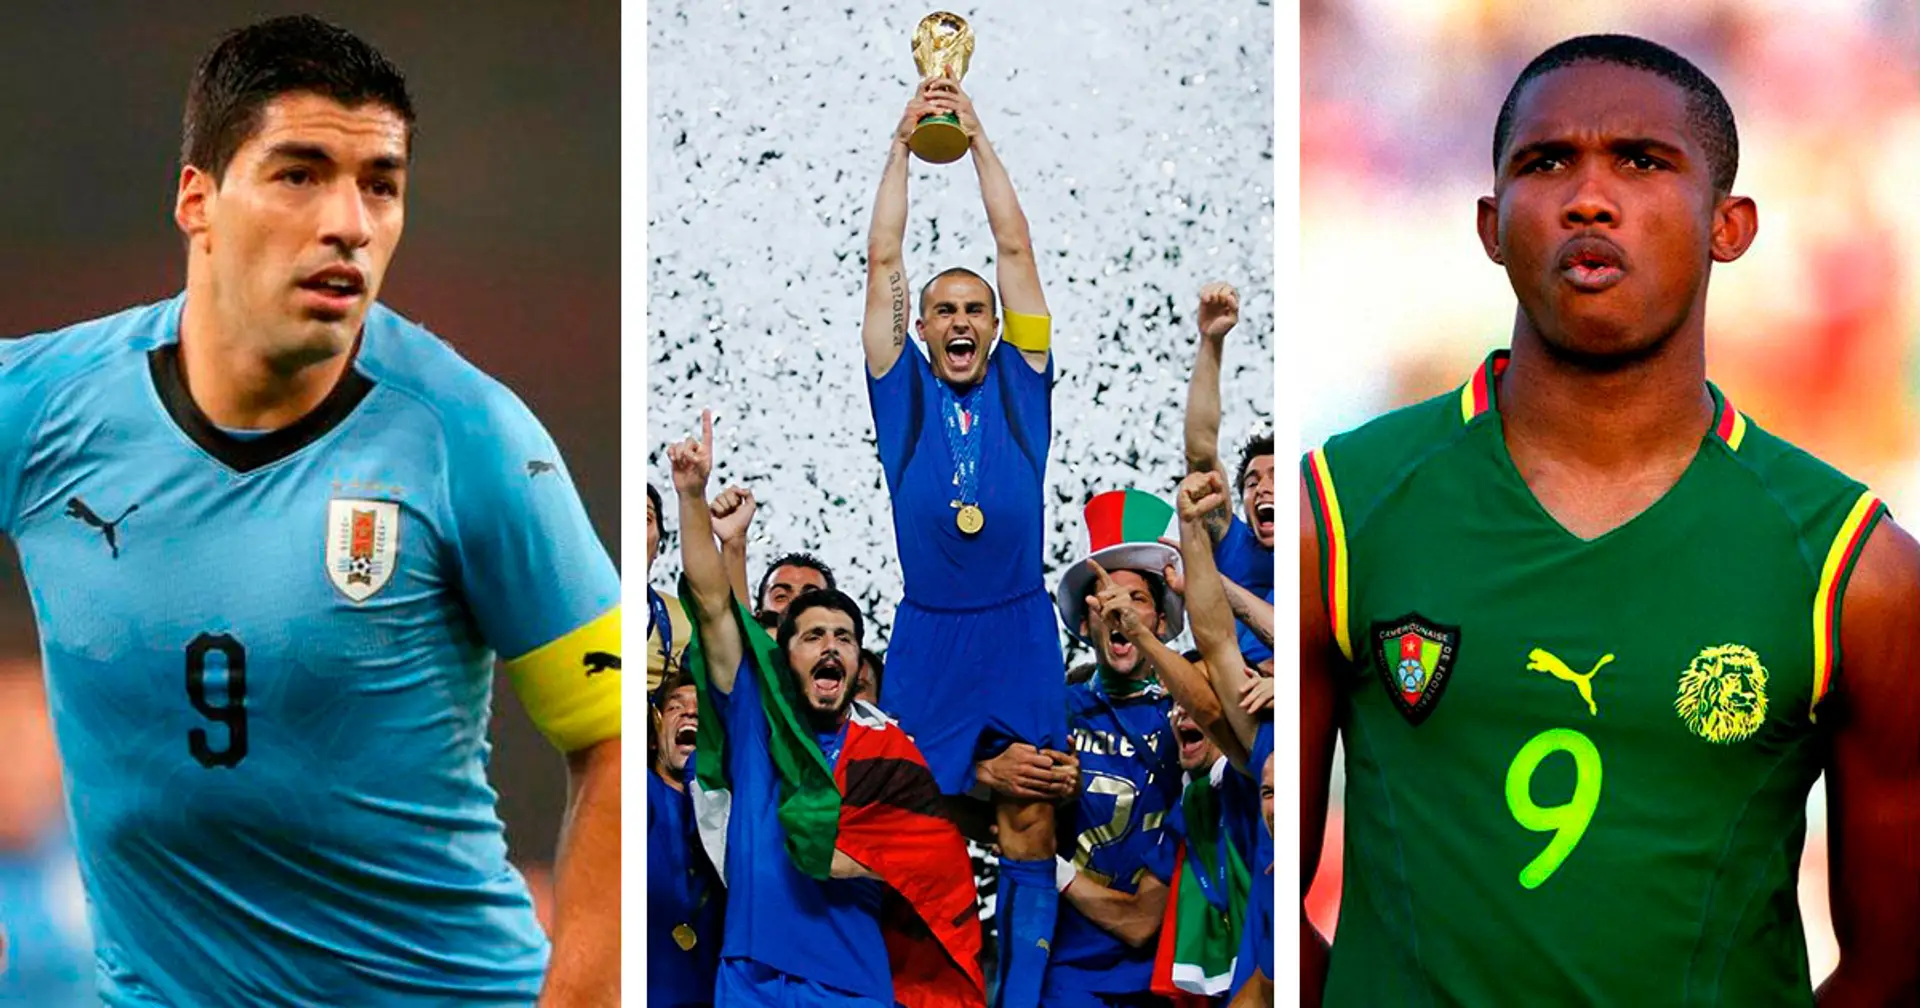 Fallen Squadra Azzurra and 4 more traditionally big football-crazy nations that are in massive decline